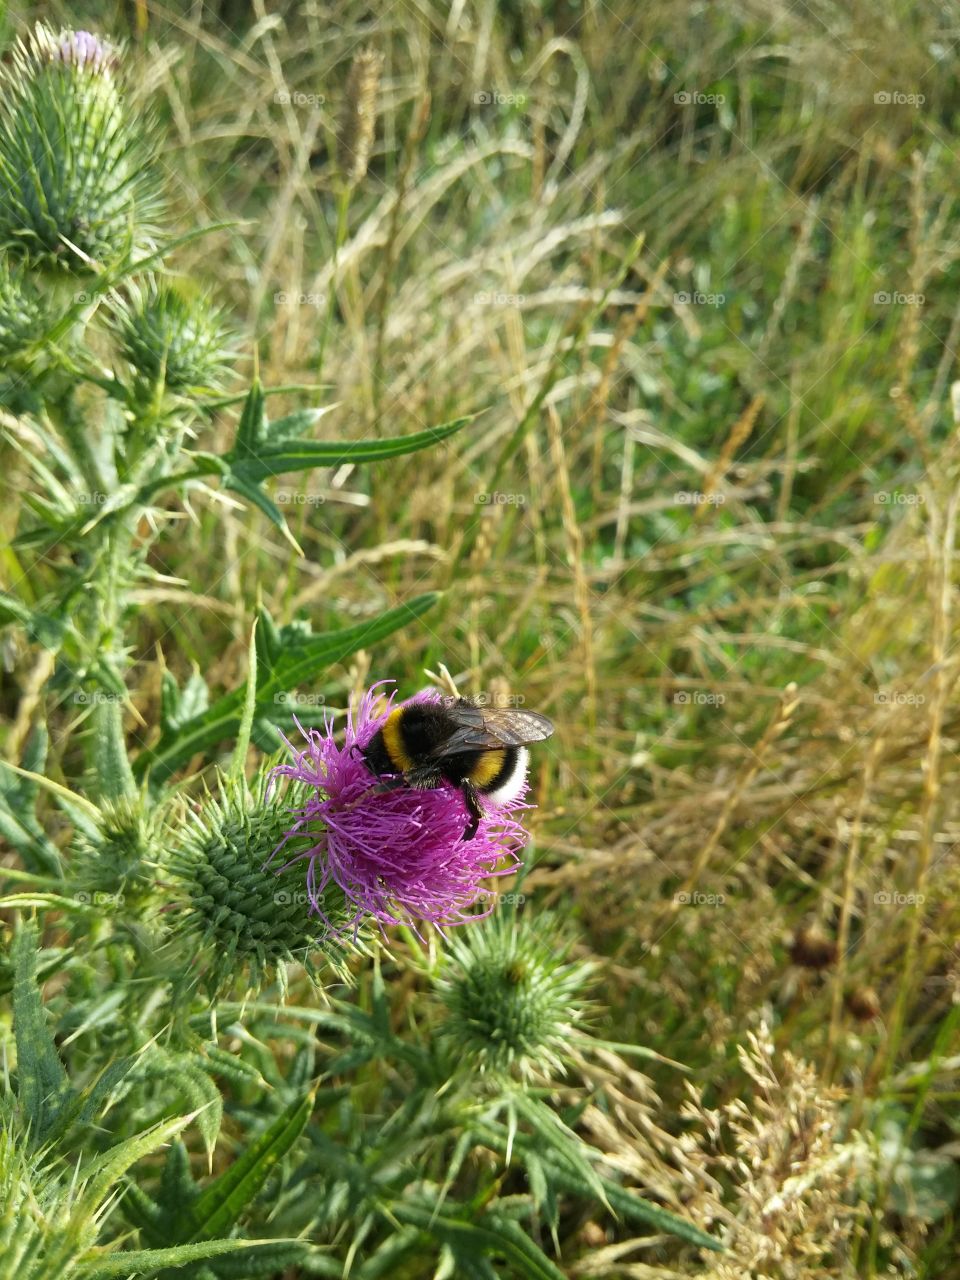 Nature, Thistle, Flora, Flower, Insect